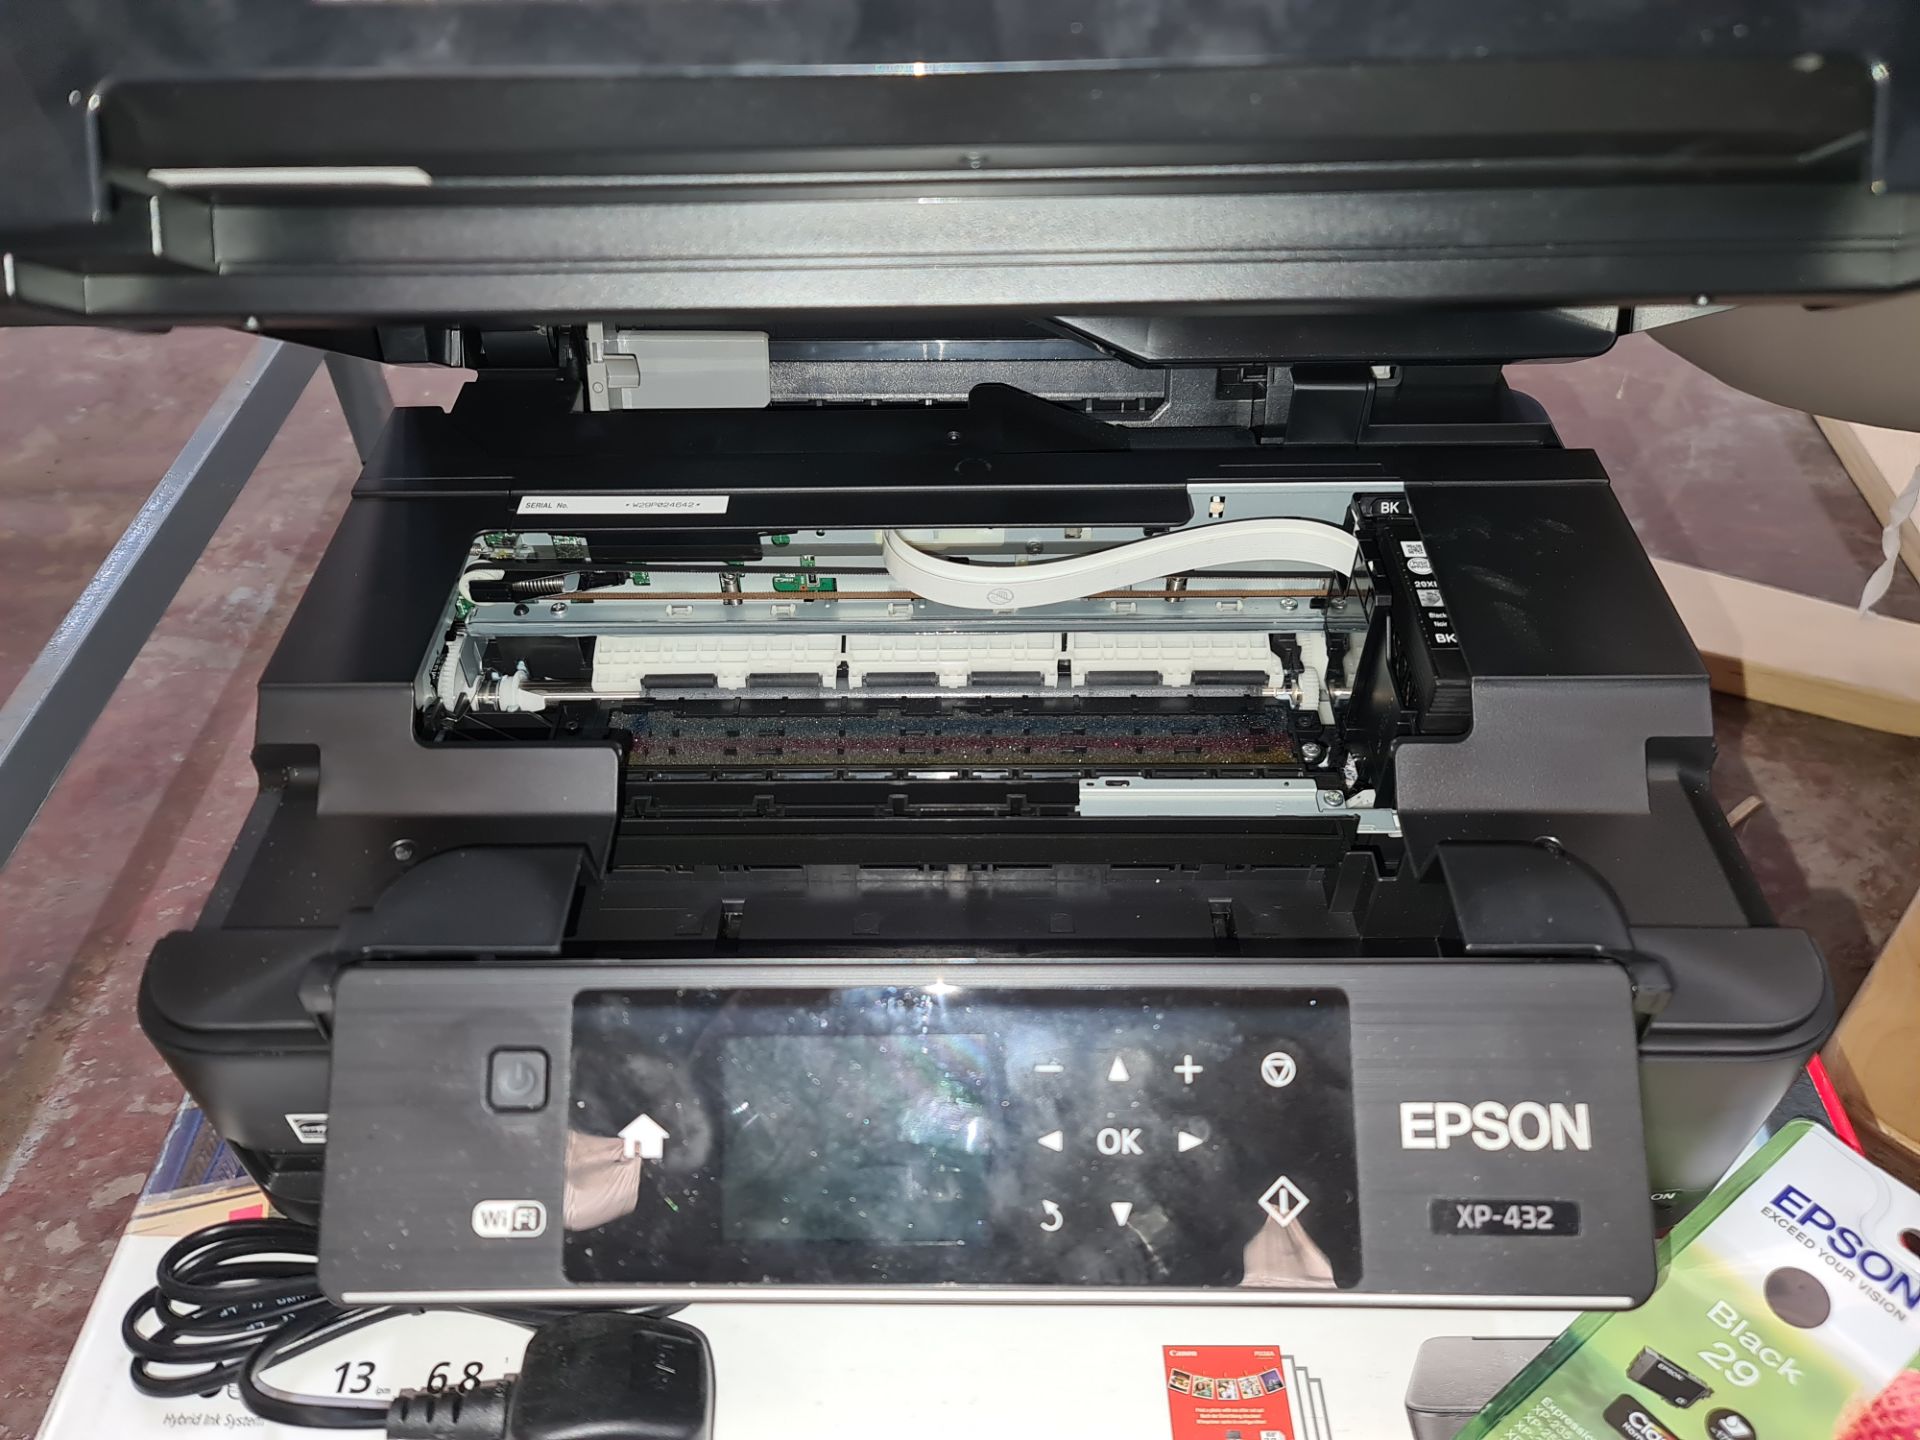 Epson multifunction printer model XP-432 plus spare cartridge for use with same NB. The box included - Image 5 of 6